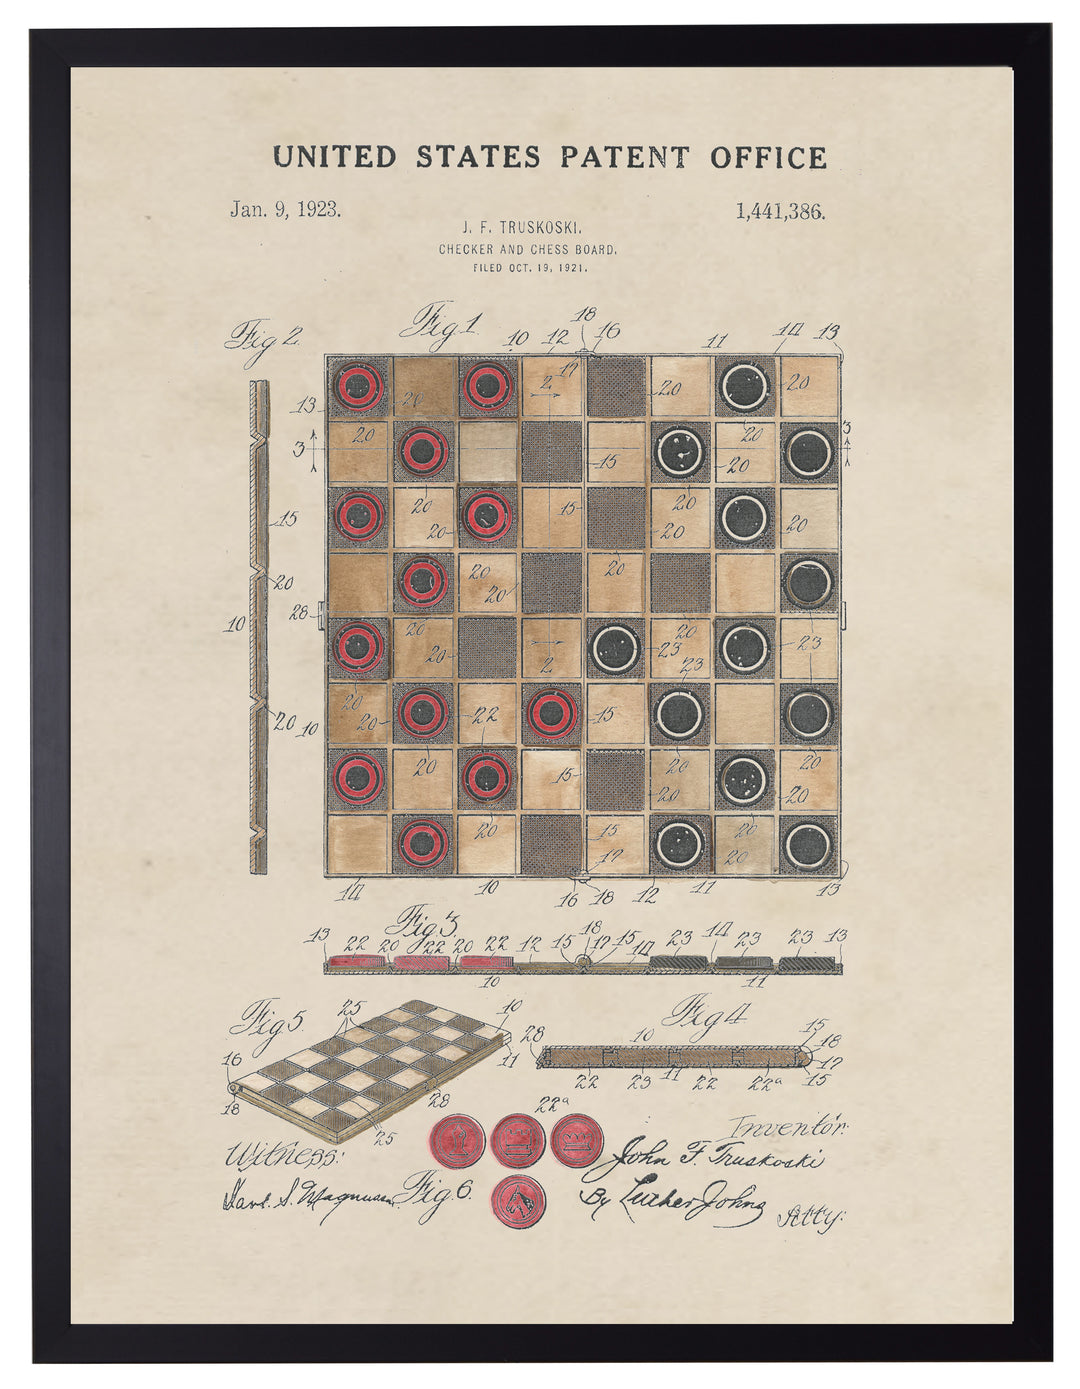 1923 Checker Board Patent Print - Chess board Poster - Checkers Game Drawing  - Game Room Decor - Parlor Game - Checker board Drawing